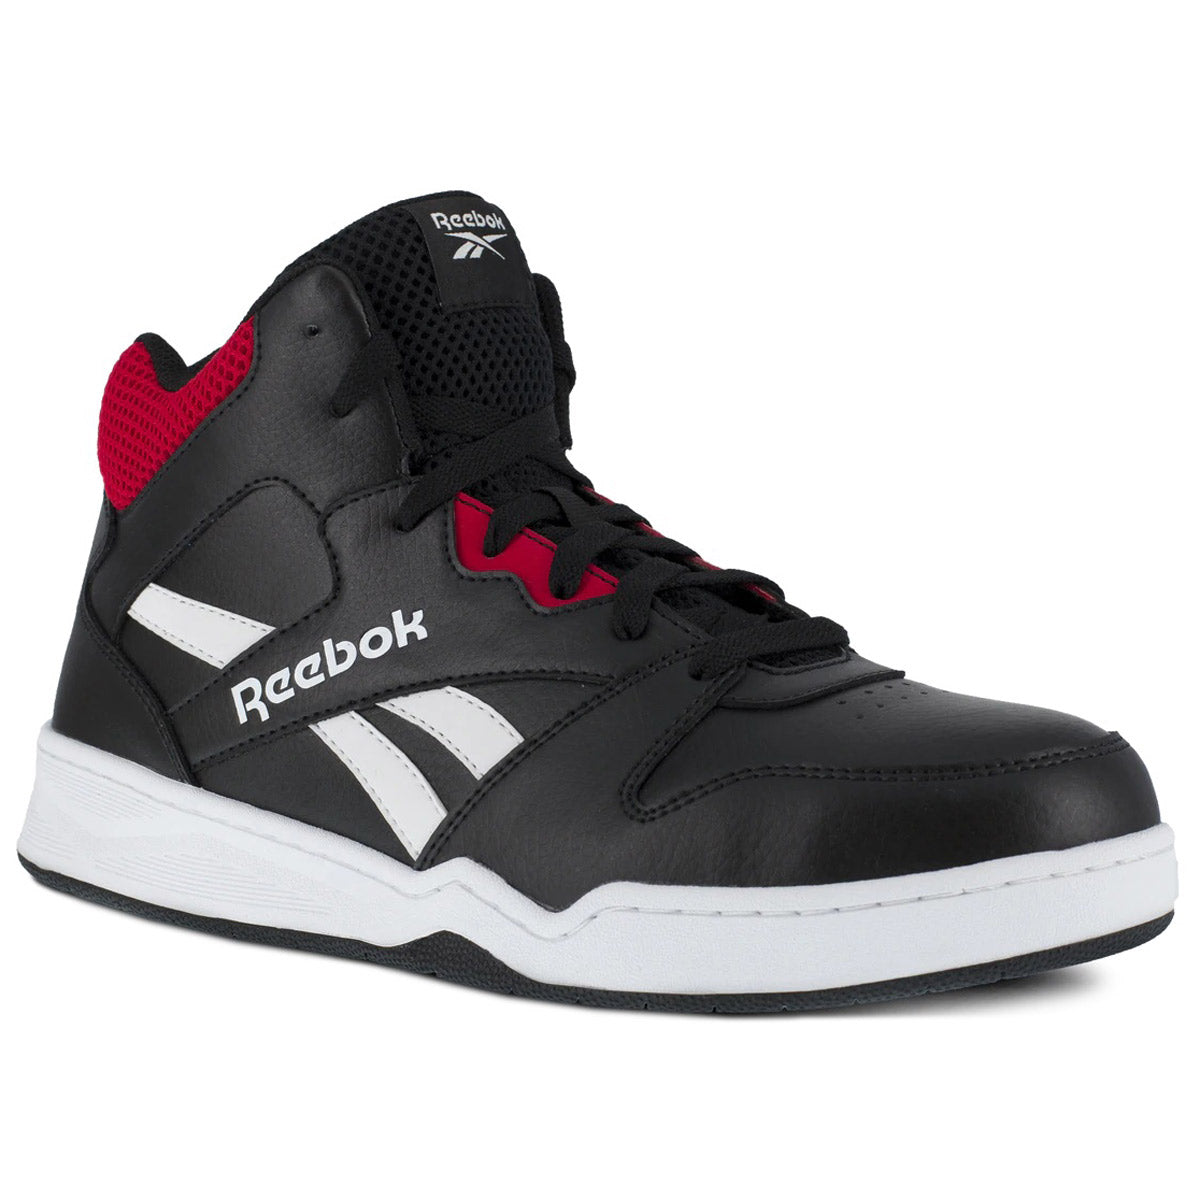 REEBOK WORK COMPOSITE TOE BB4500 MID BLK/WH/RED   - MENS